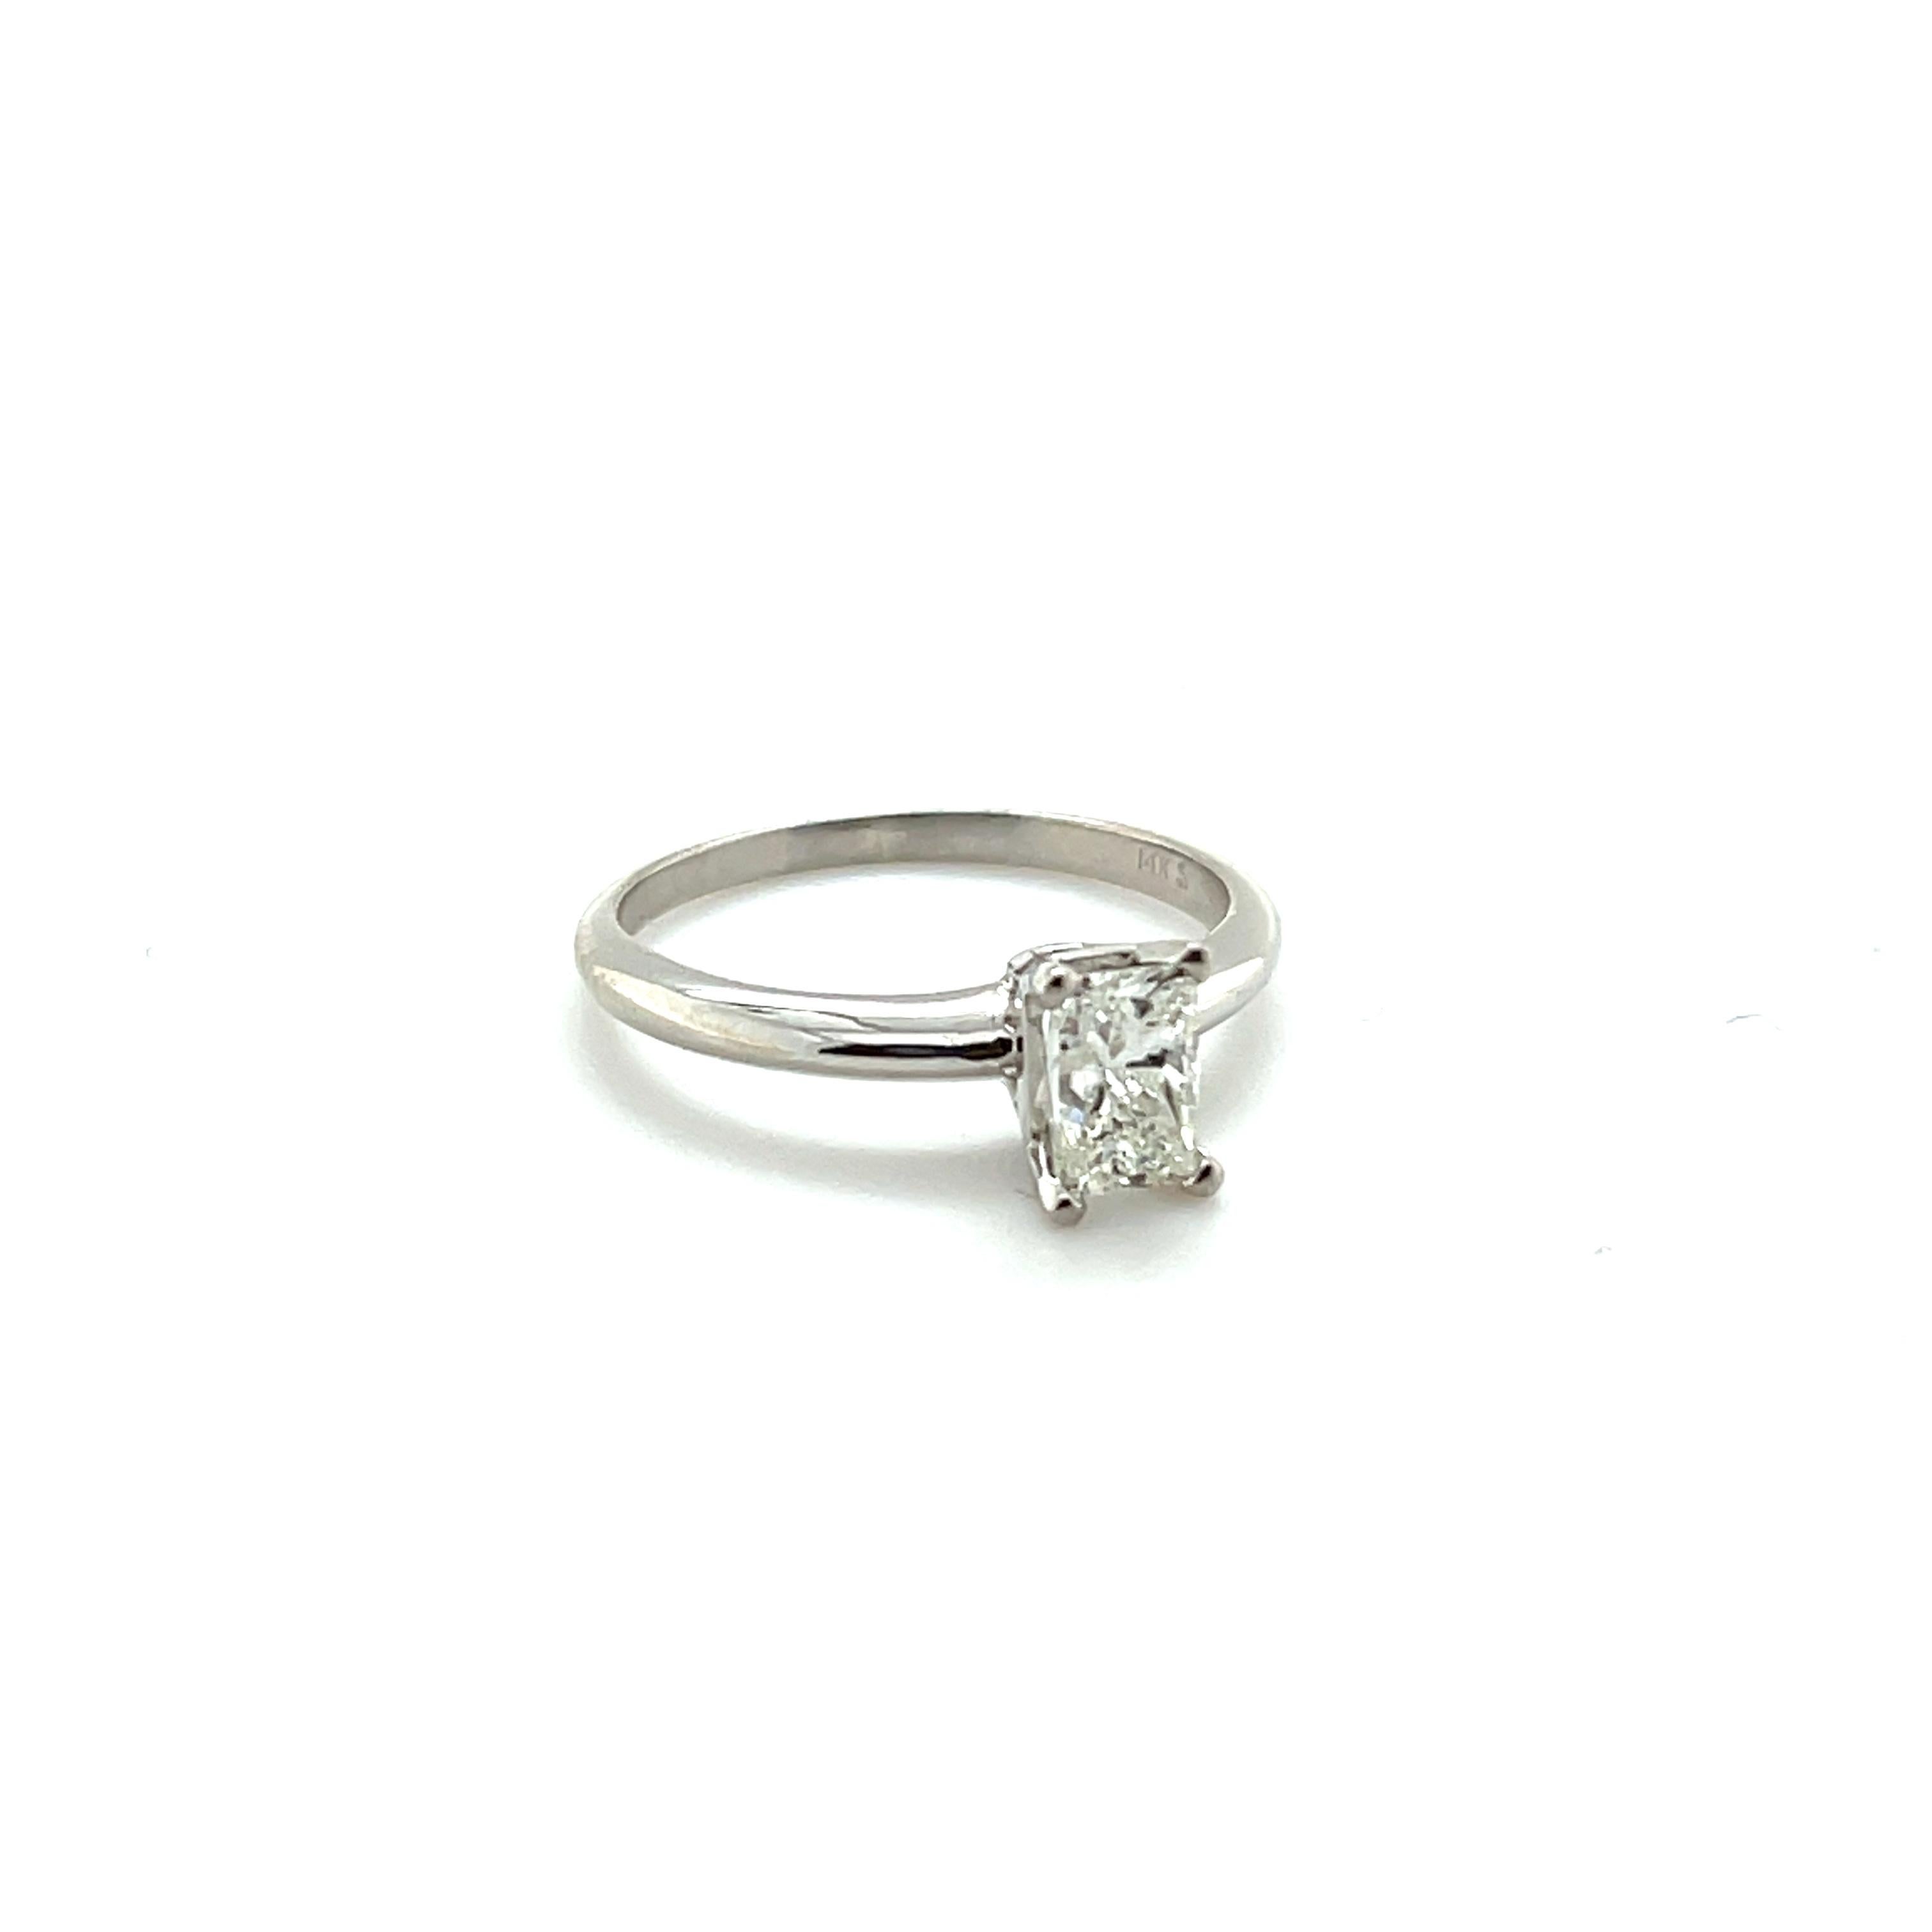 Gender: Ladies
Size: 6.5 US
Total Weight: 2.33 grams
Purity: 14K White Gold
Shank type: Half Round
Condition: Pre-owned in excellent condition. Quality and Durability was checked by professional jewelers.

4-Prong Set in 14 Karat White Gold